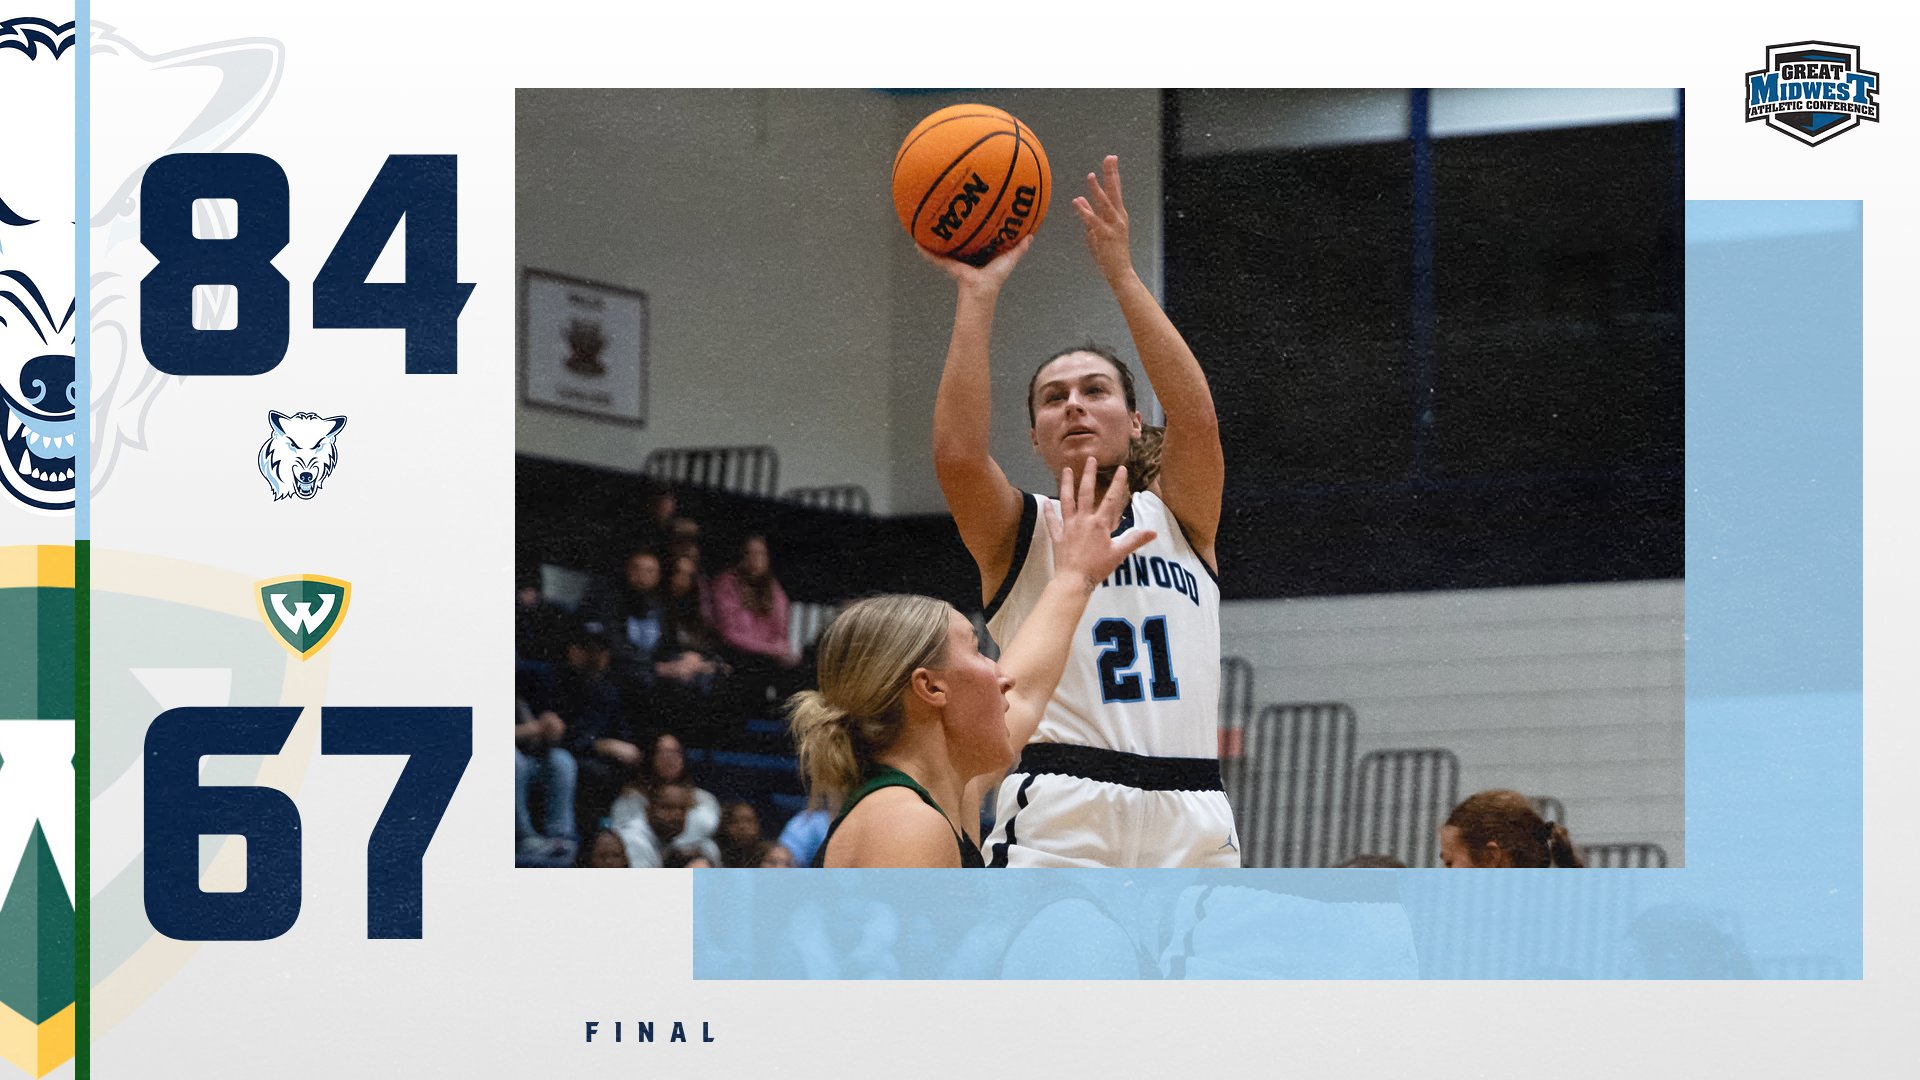 Women's Basketball Finishes 2023 With 84-67 Win Over Wayne State